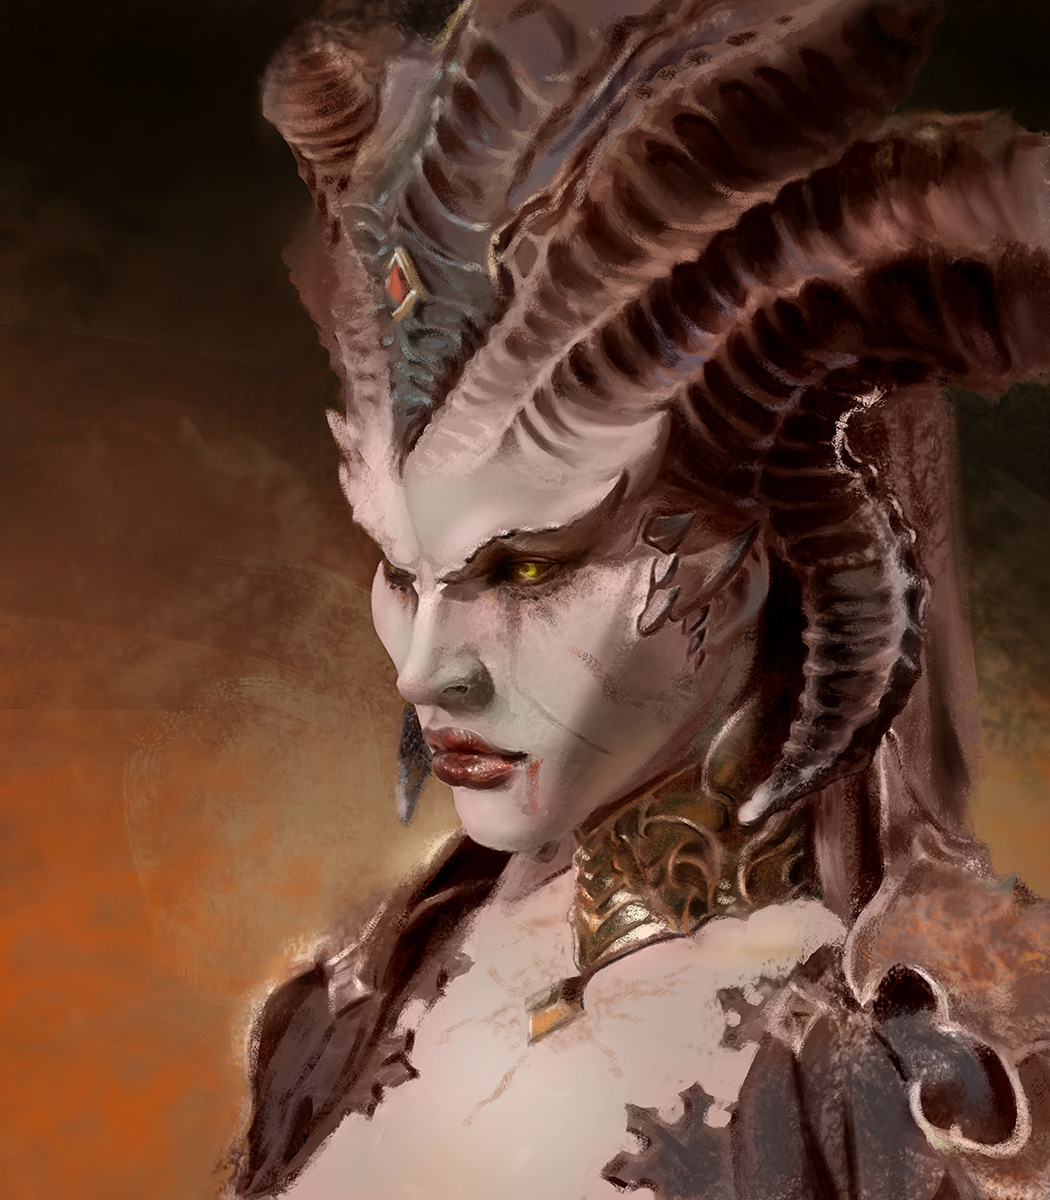 An old Lilith painting from when I was doing some texture practice. #DiabloIV #DiabloFanart